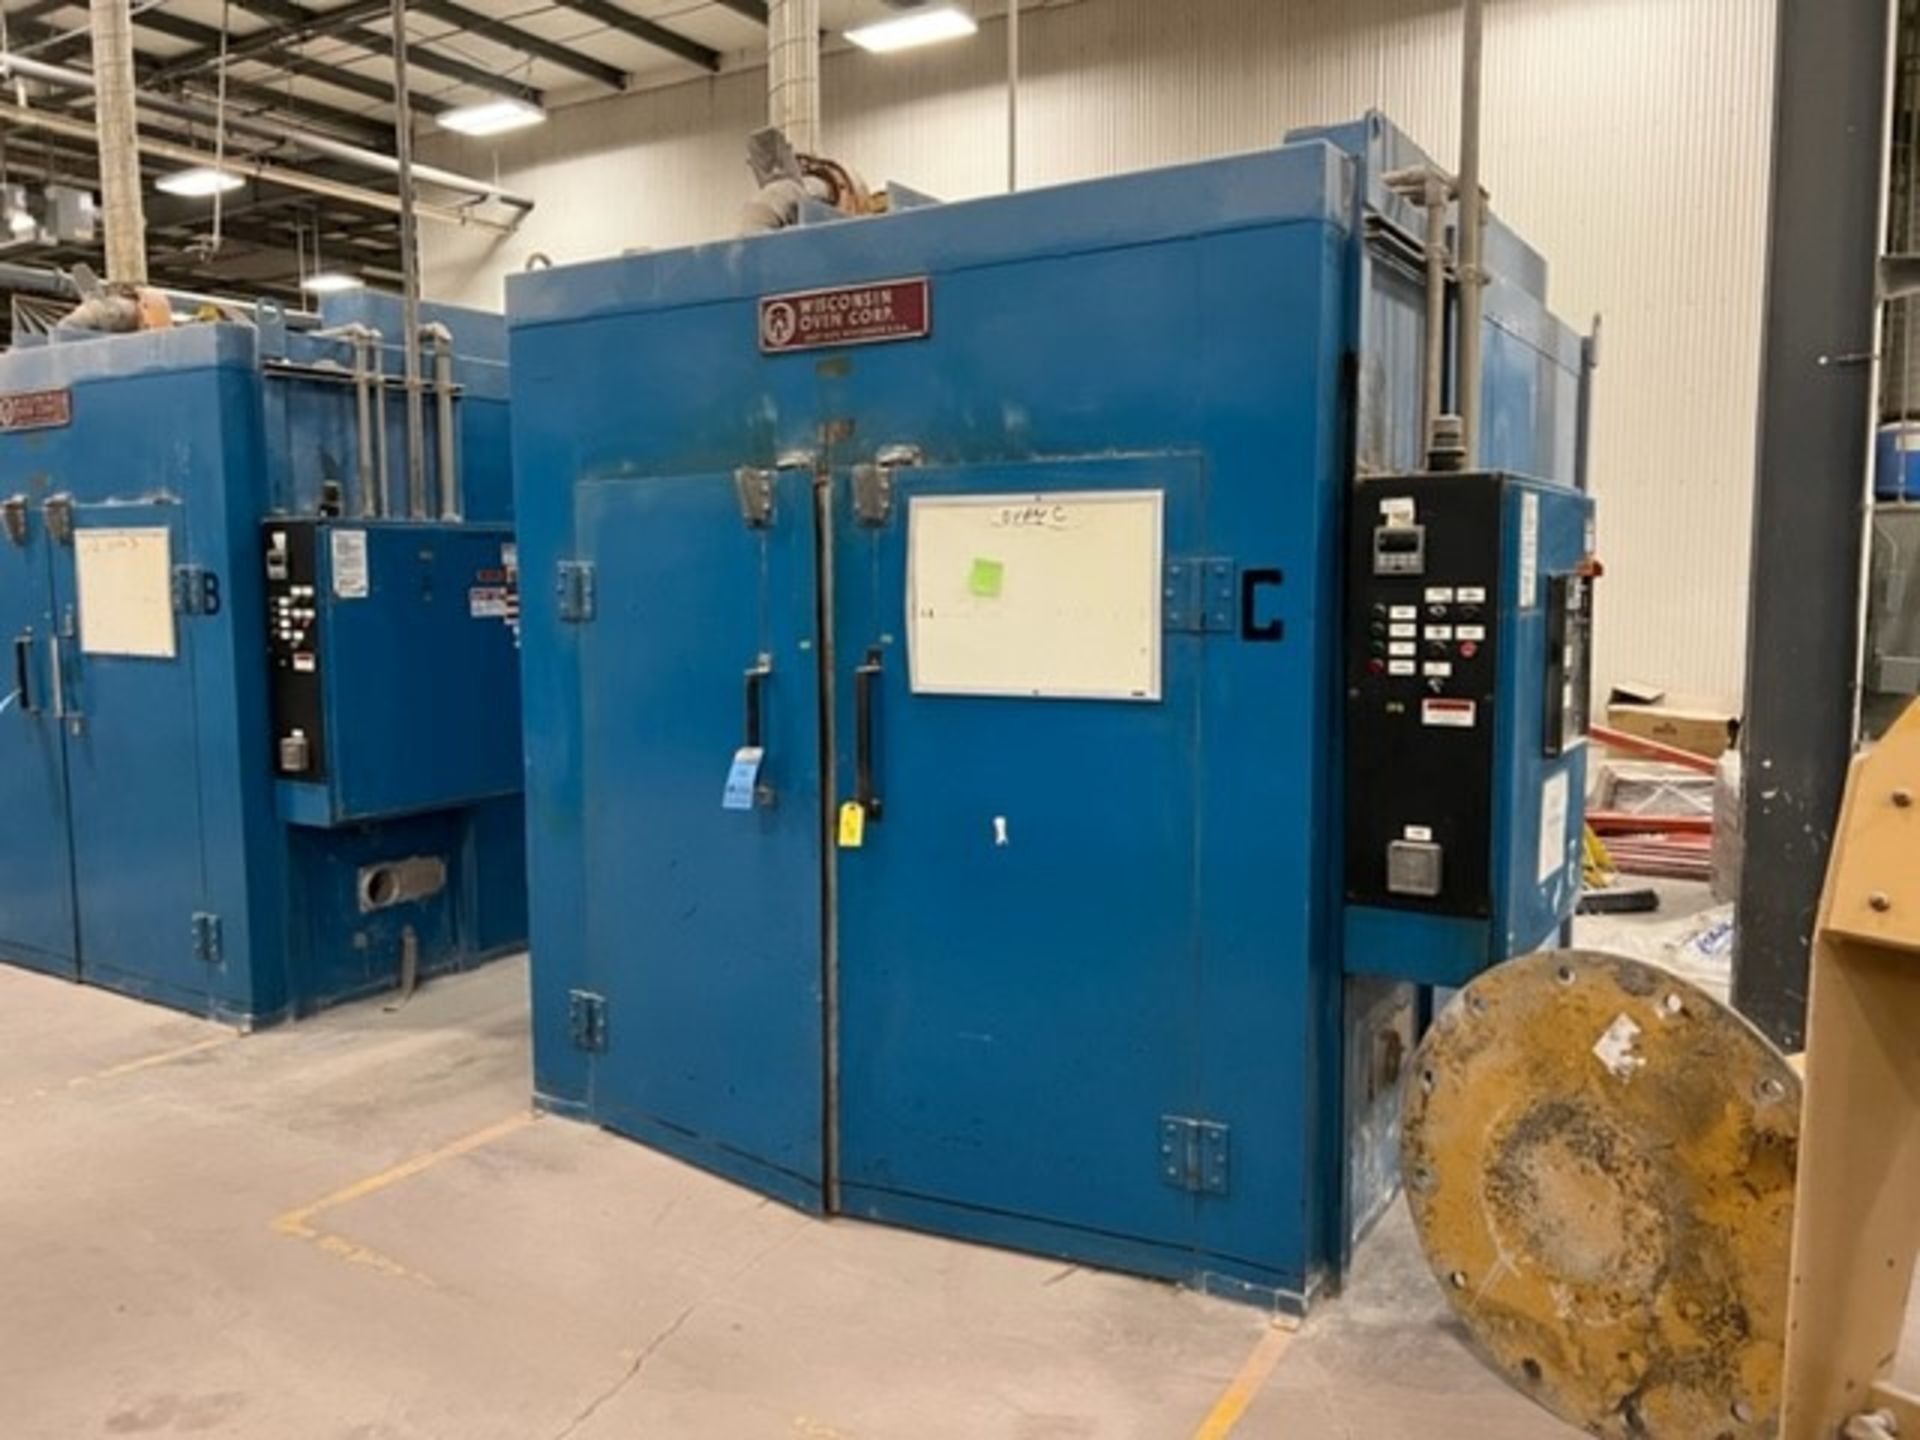 6' X 10' X 6' WISCONSIN OVEN MODEL SWN-610-6E ELECTRIC BATCH OVEN; S/N 112600805, 500 DEGREE,